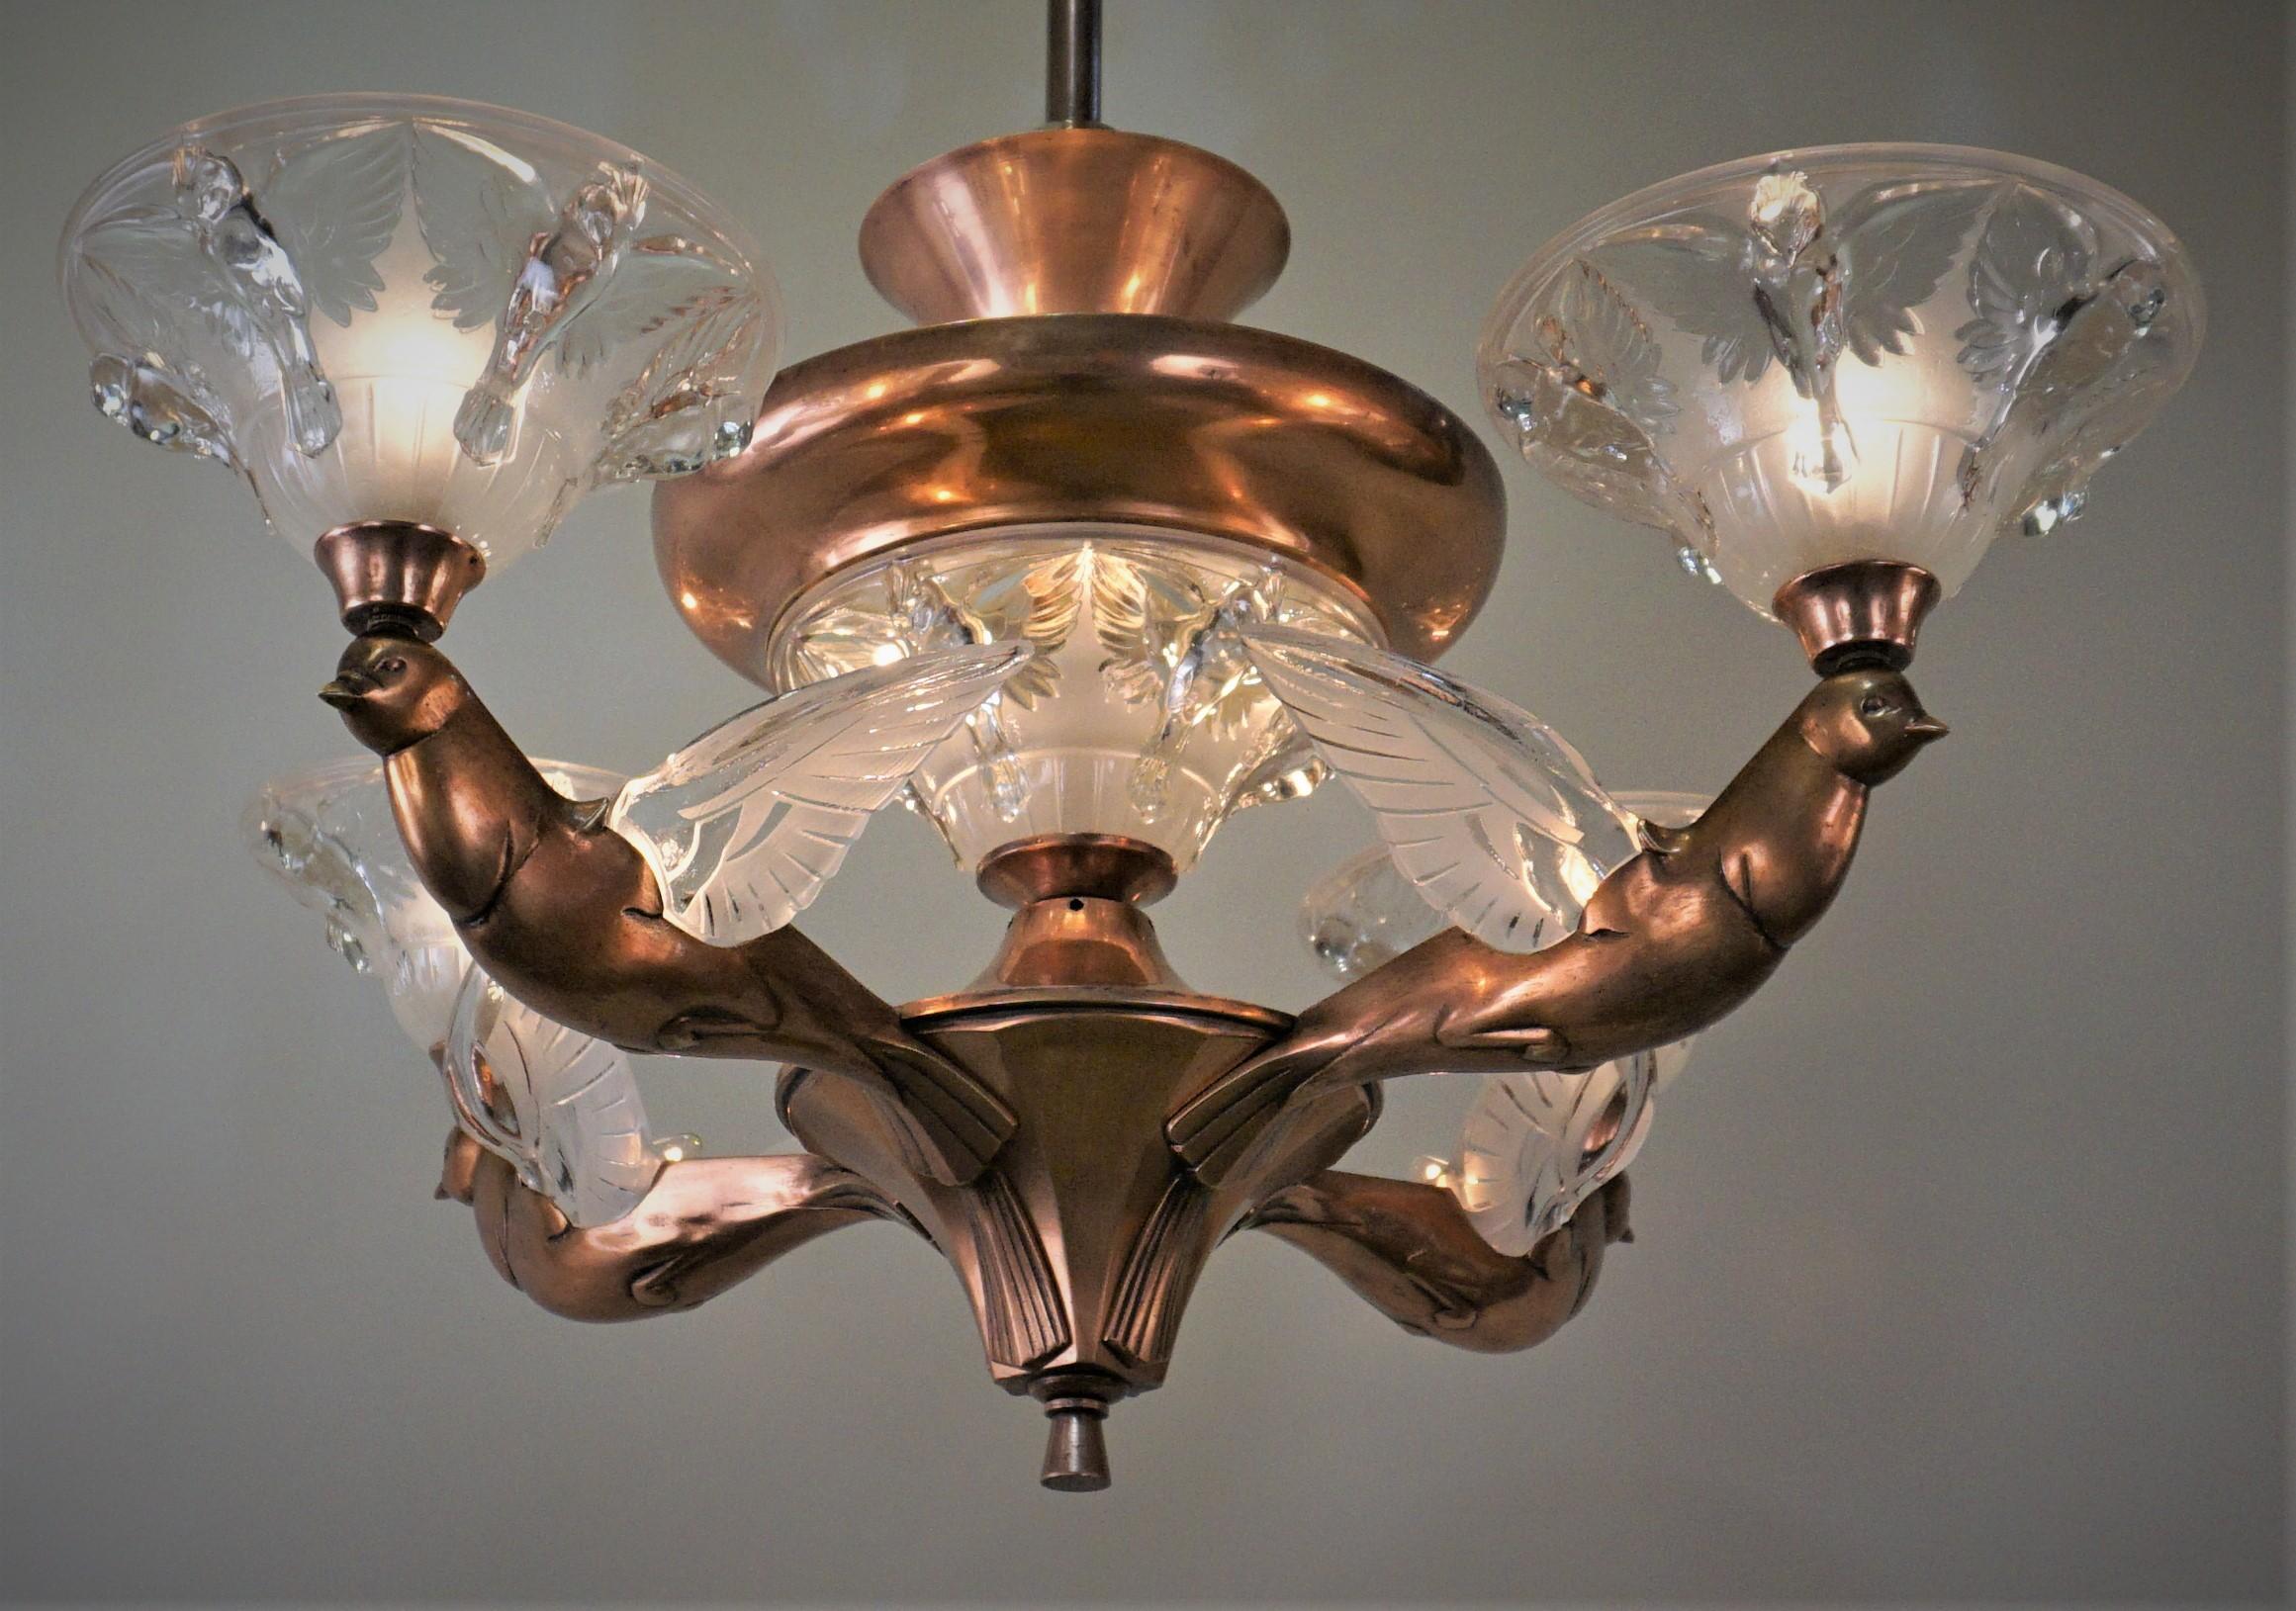 A superb four-arm copper over bronze art deco chandelier. Each arm is made in a shape of a bird which has glass wings with a light located in the center. This chandelier is a truly unique and elegant piece.